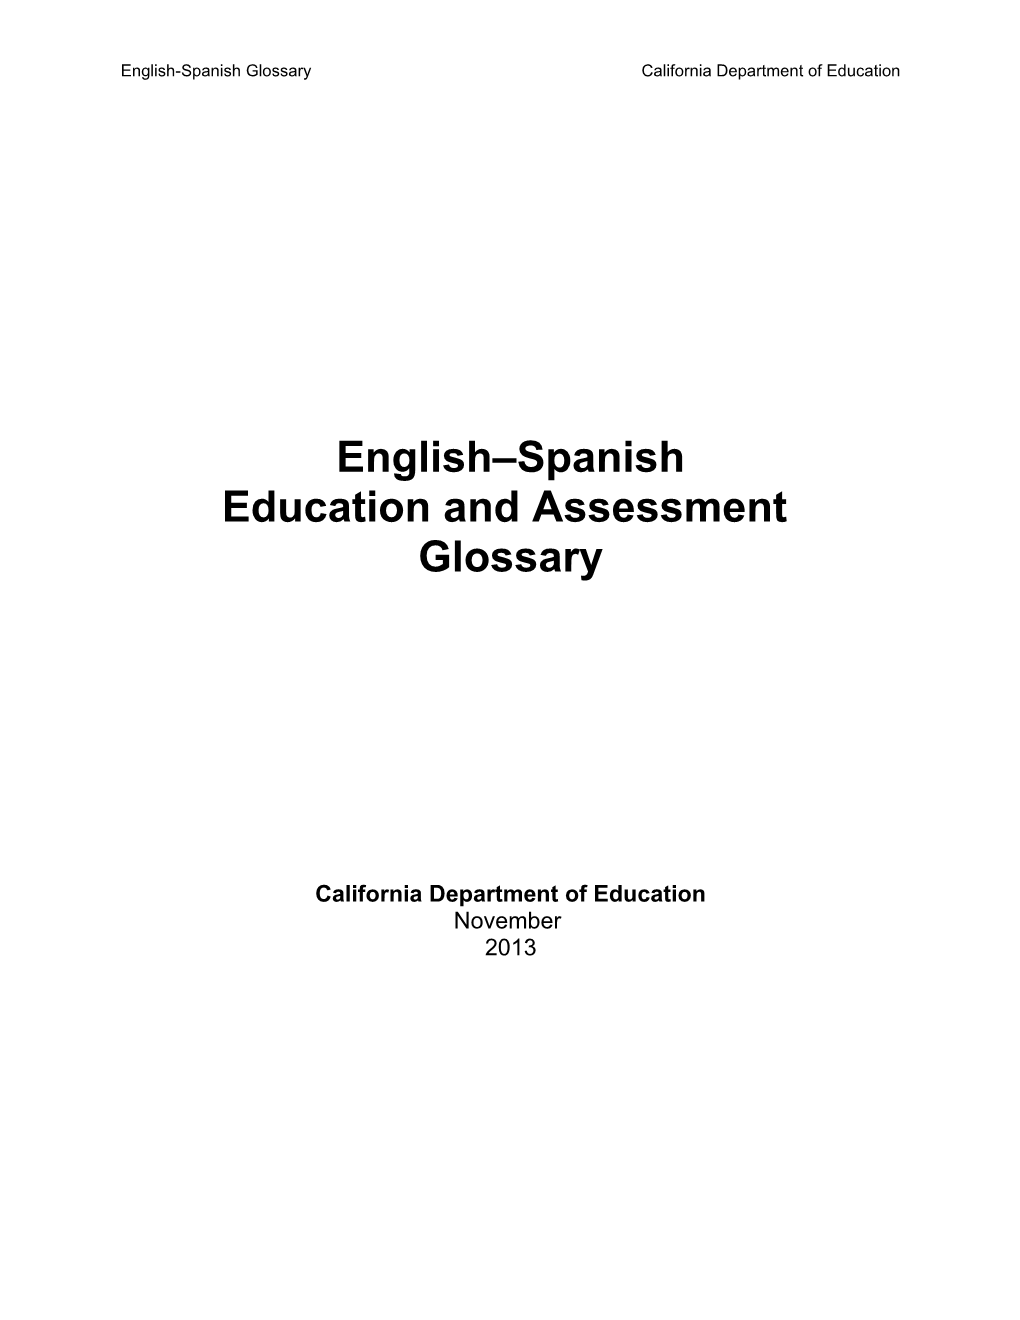 English-Spanish Assessment Glossary - Assessments (CA Dept of Education)